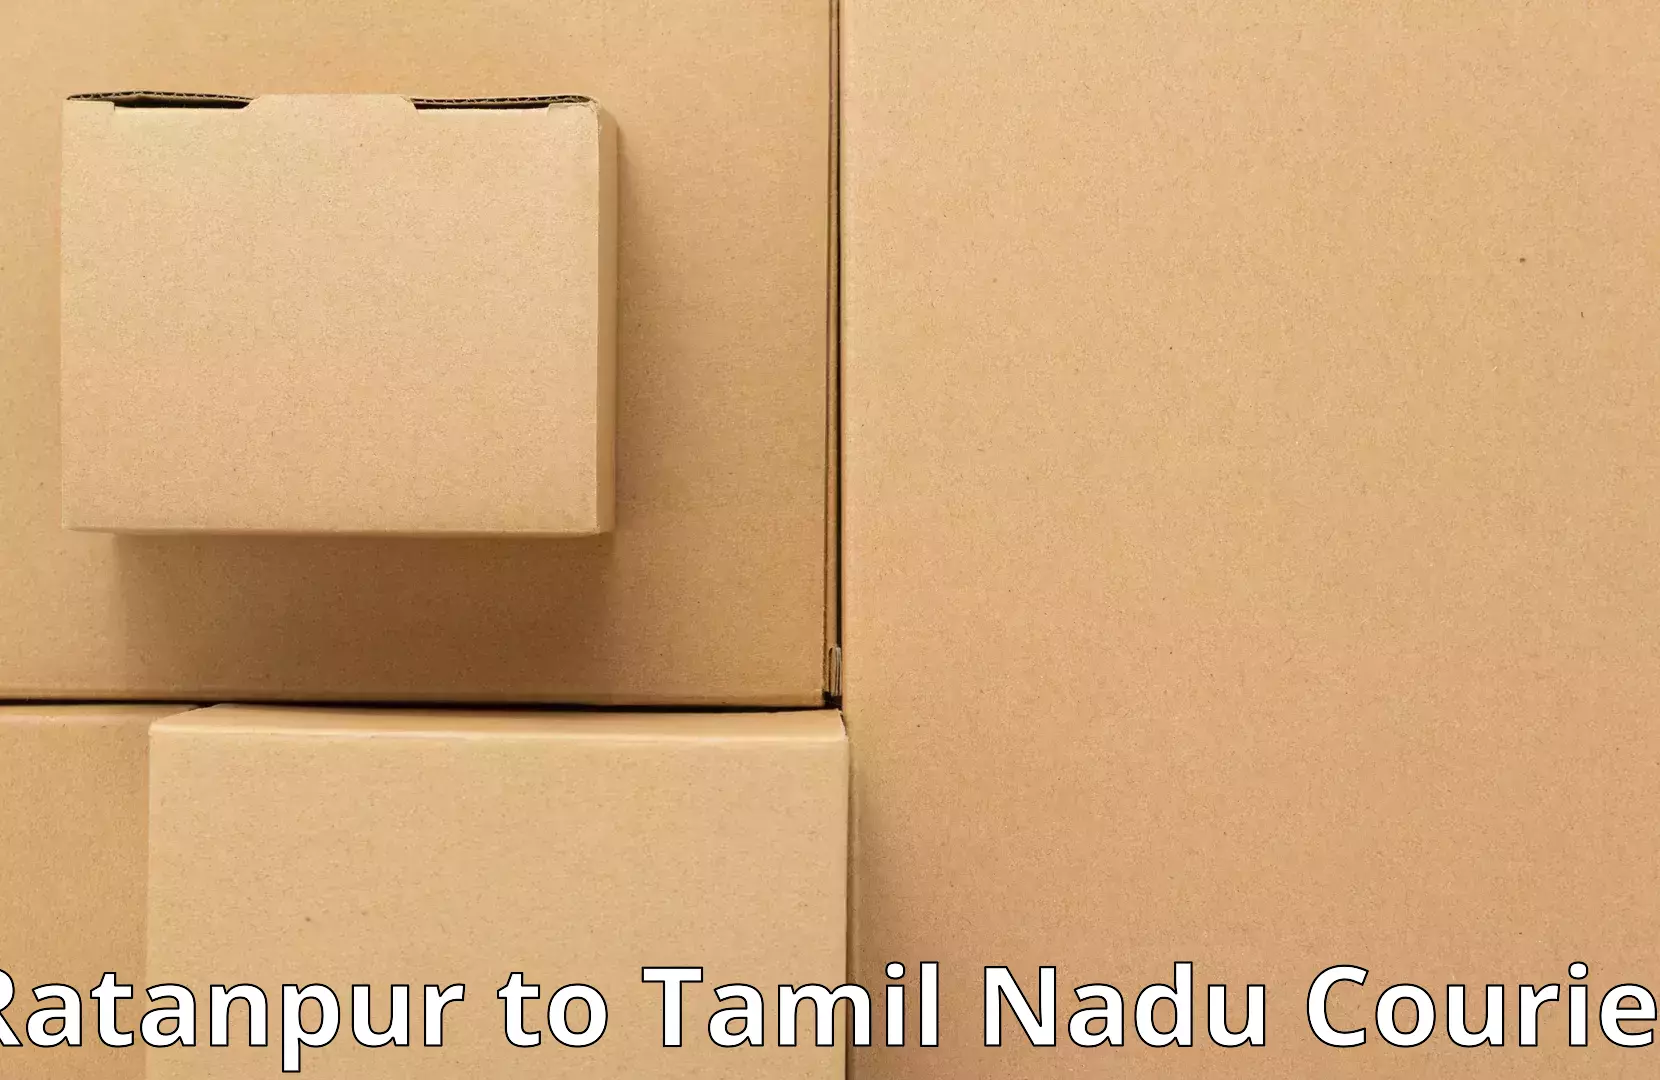 Furniture relocation experts Ratanpur to Chennai Port